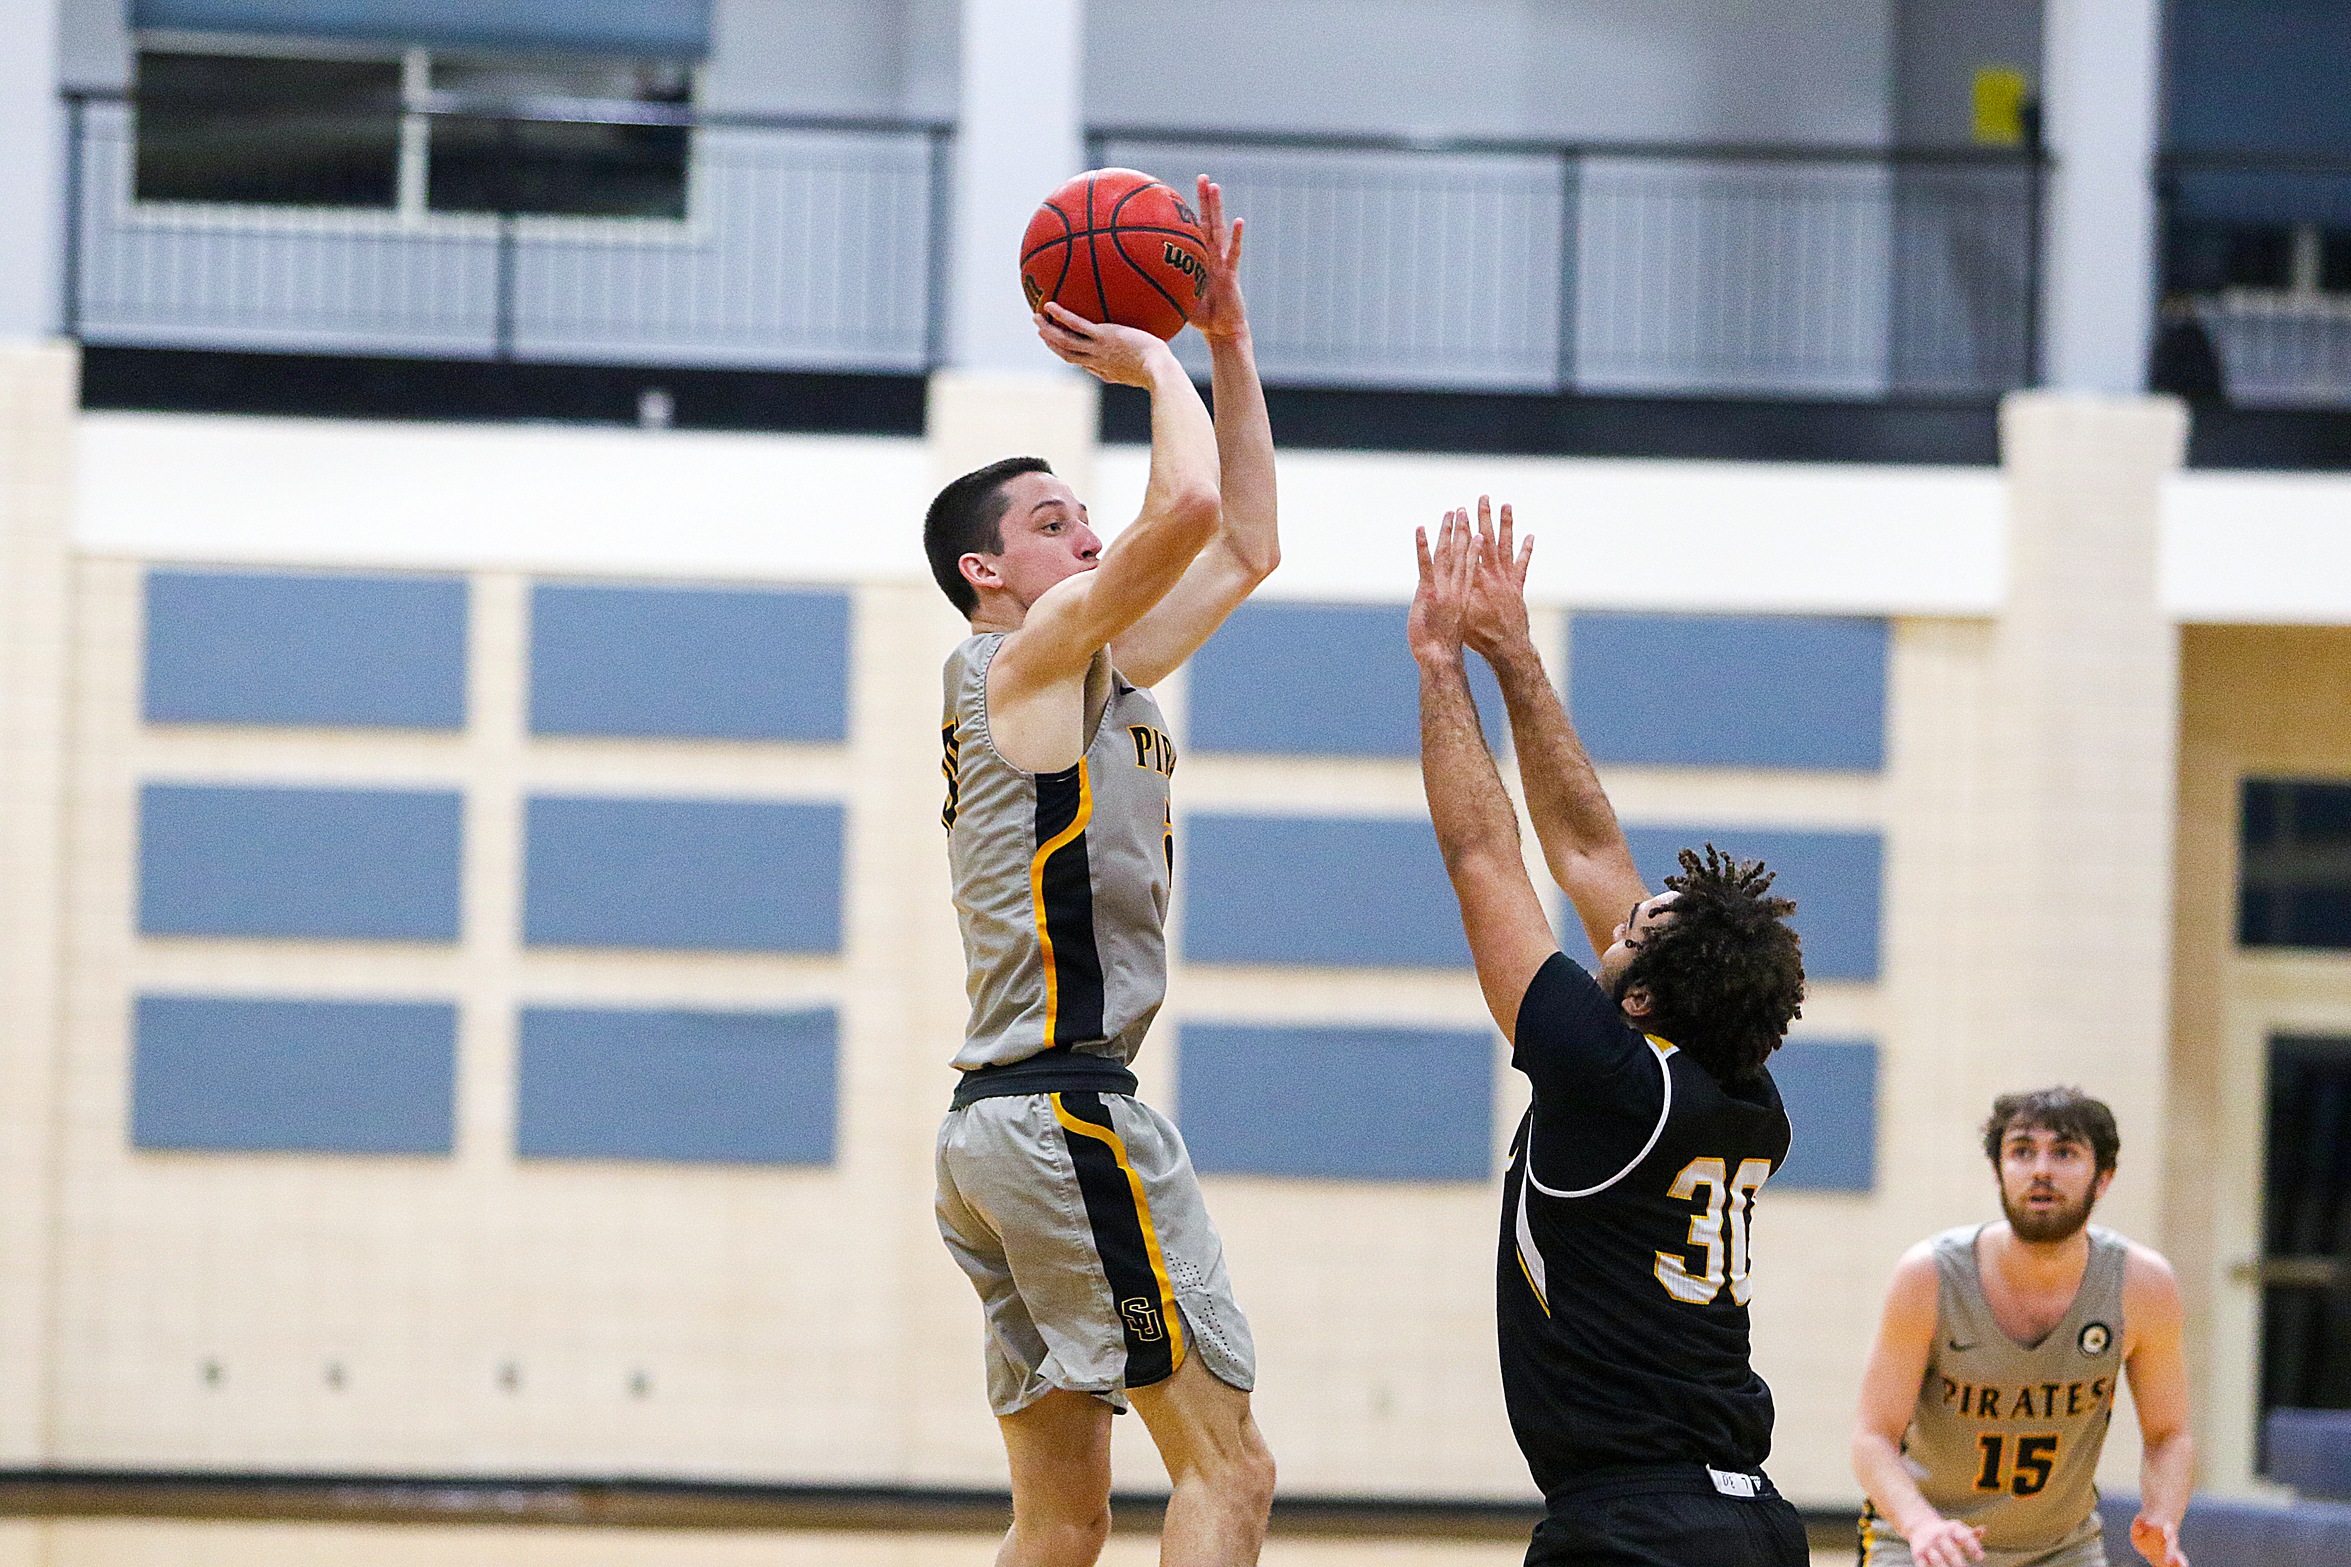 Kyle Poerschke Wins SCAC Player of the Week